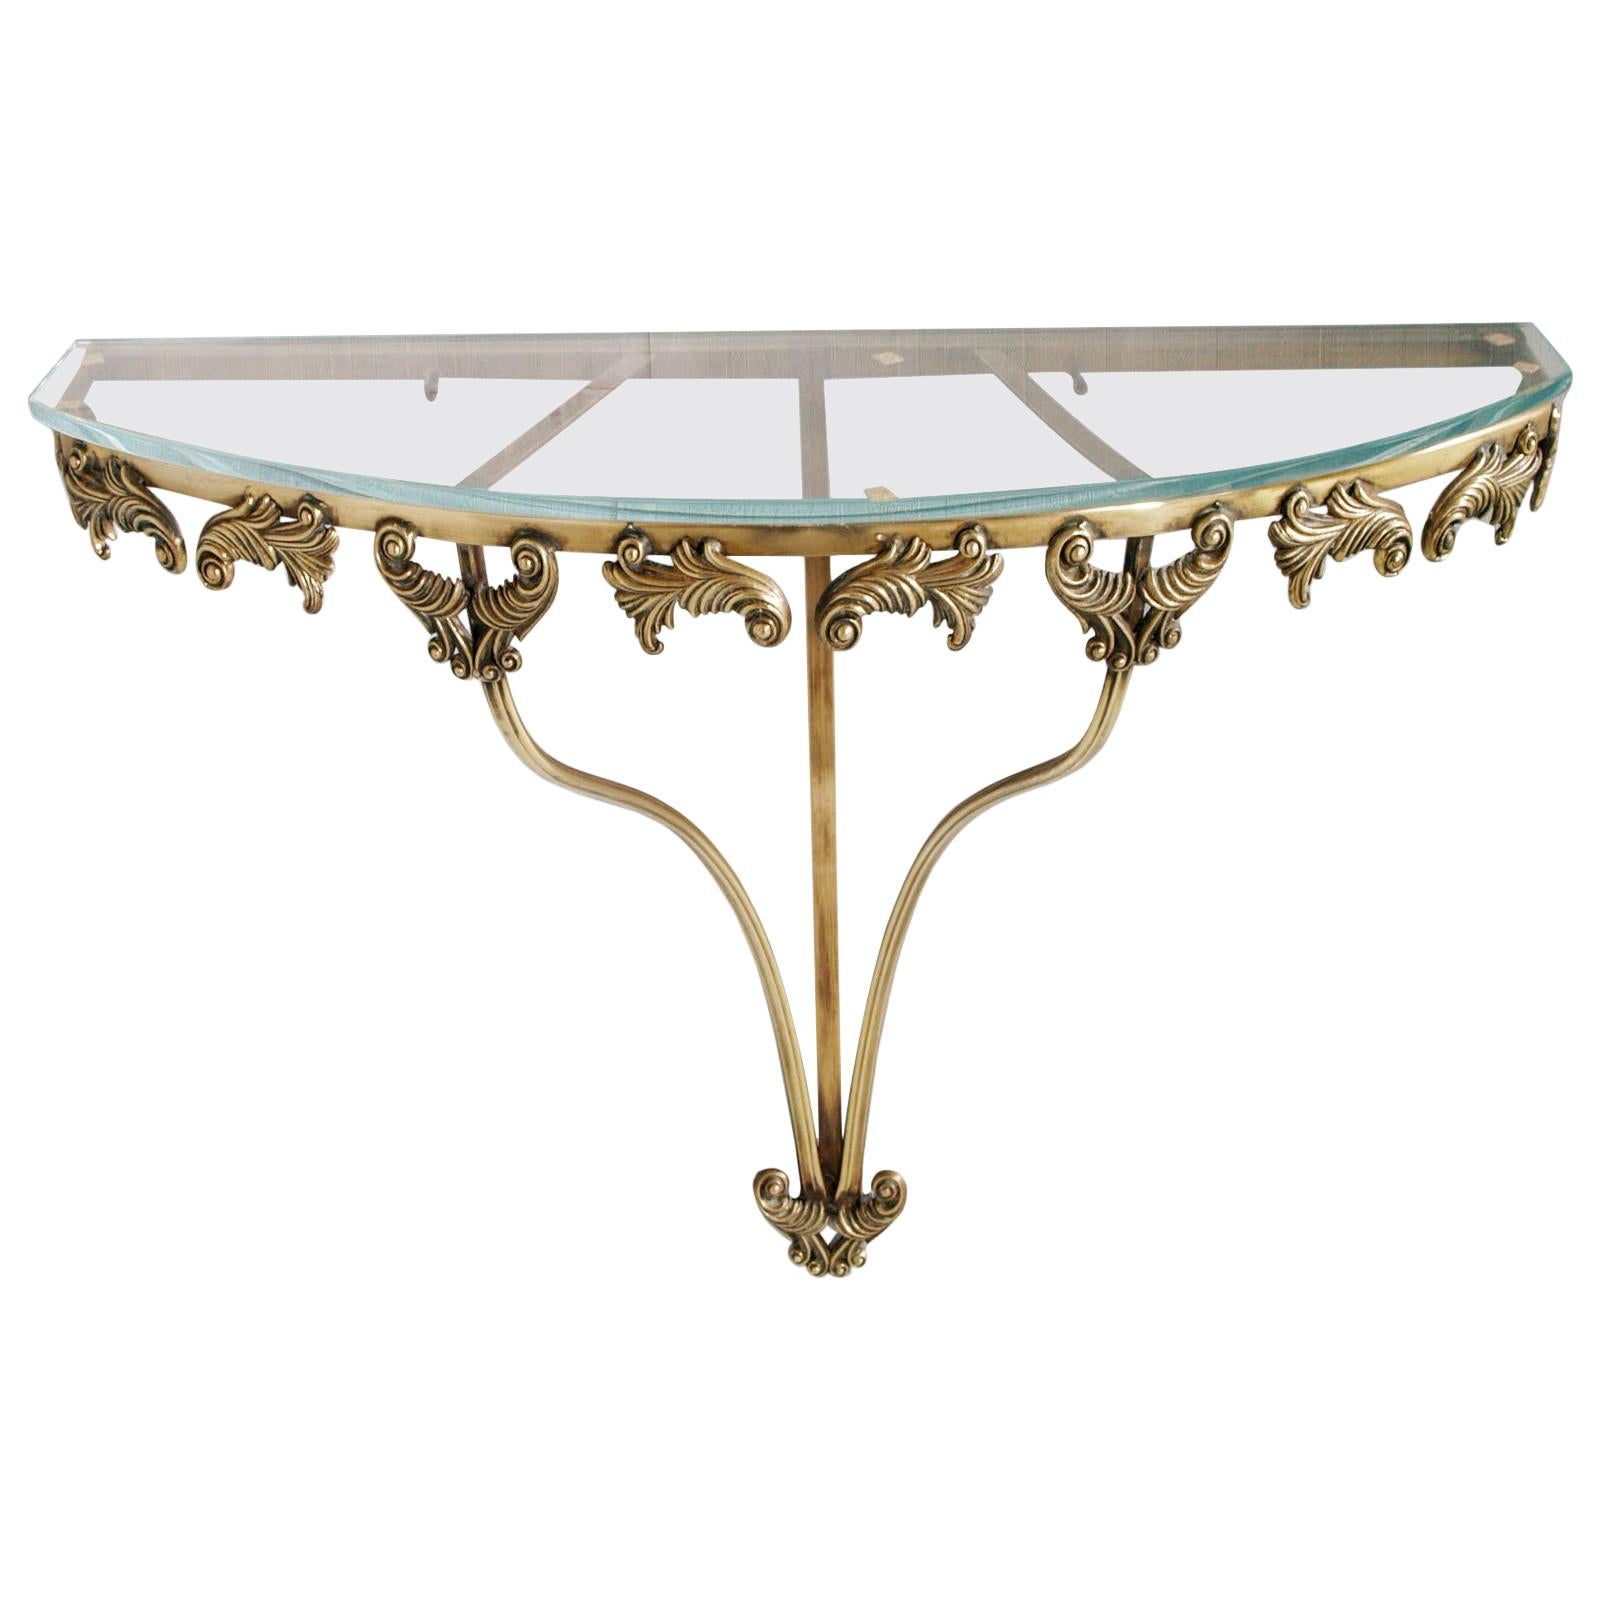 Mid-Century Modern Console, Gilt Bronze and Cristal, Attributed to Colli Torino